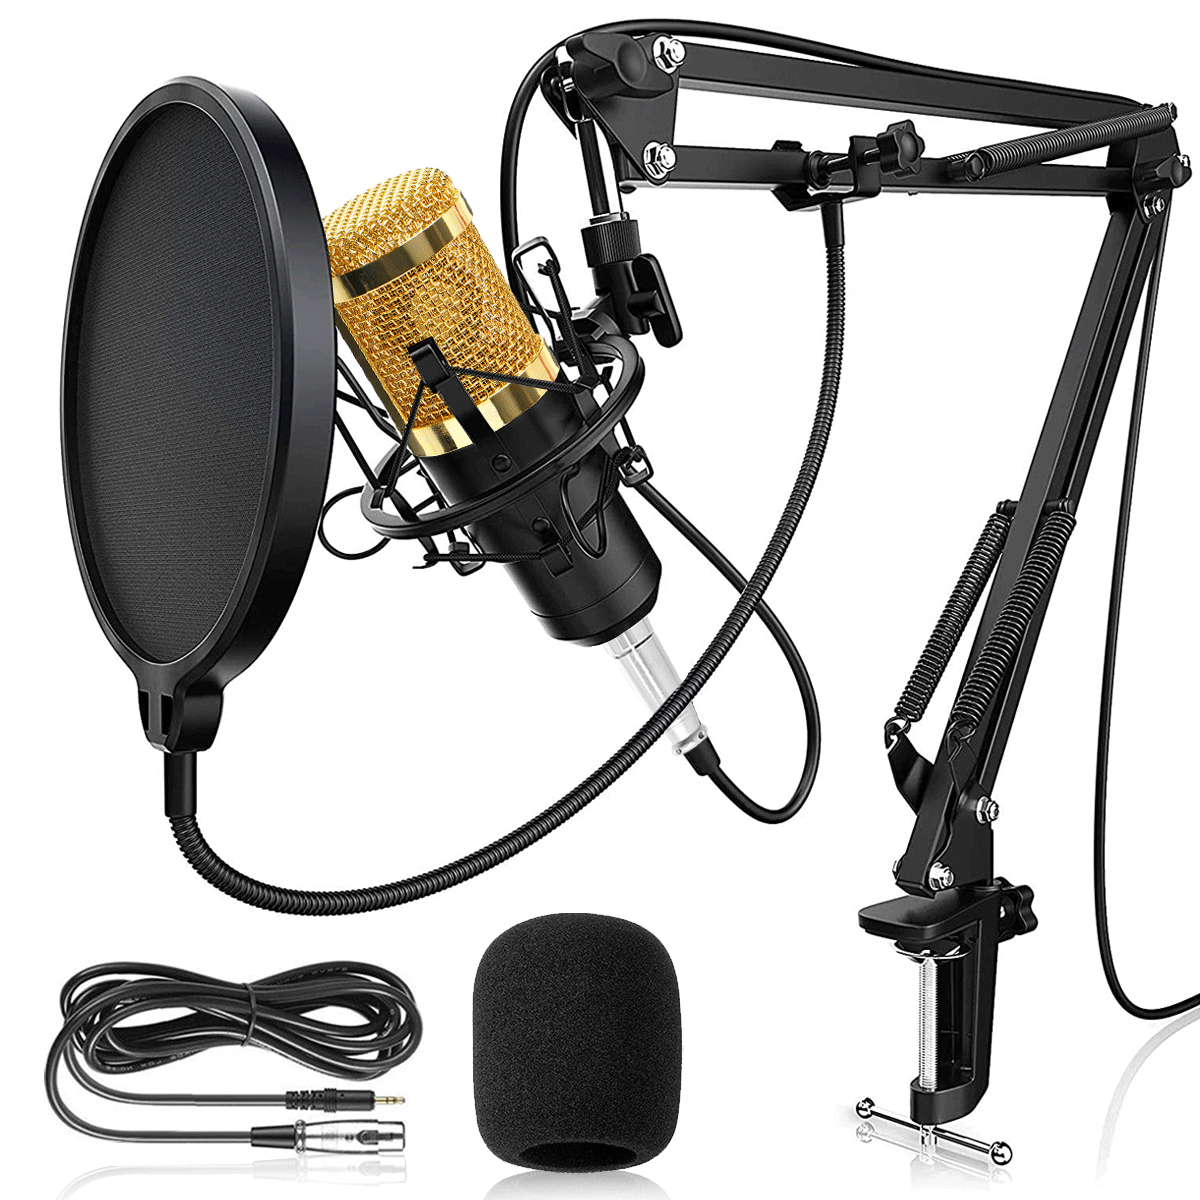 MSIZOY 3.5mm Cardioid Condenser Microphone XLR Computer Studio Mic with Shock Mount Pop Filter USB Sound Card Compatible with Phone PC Laptop Desktop Windows for Streaming Podcasting Vocal Recording 